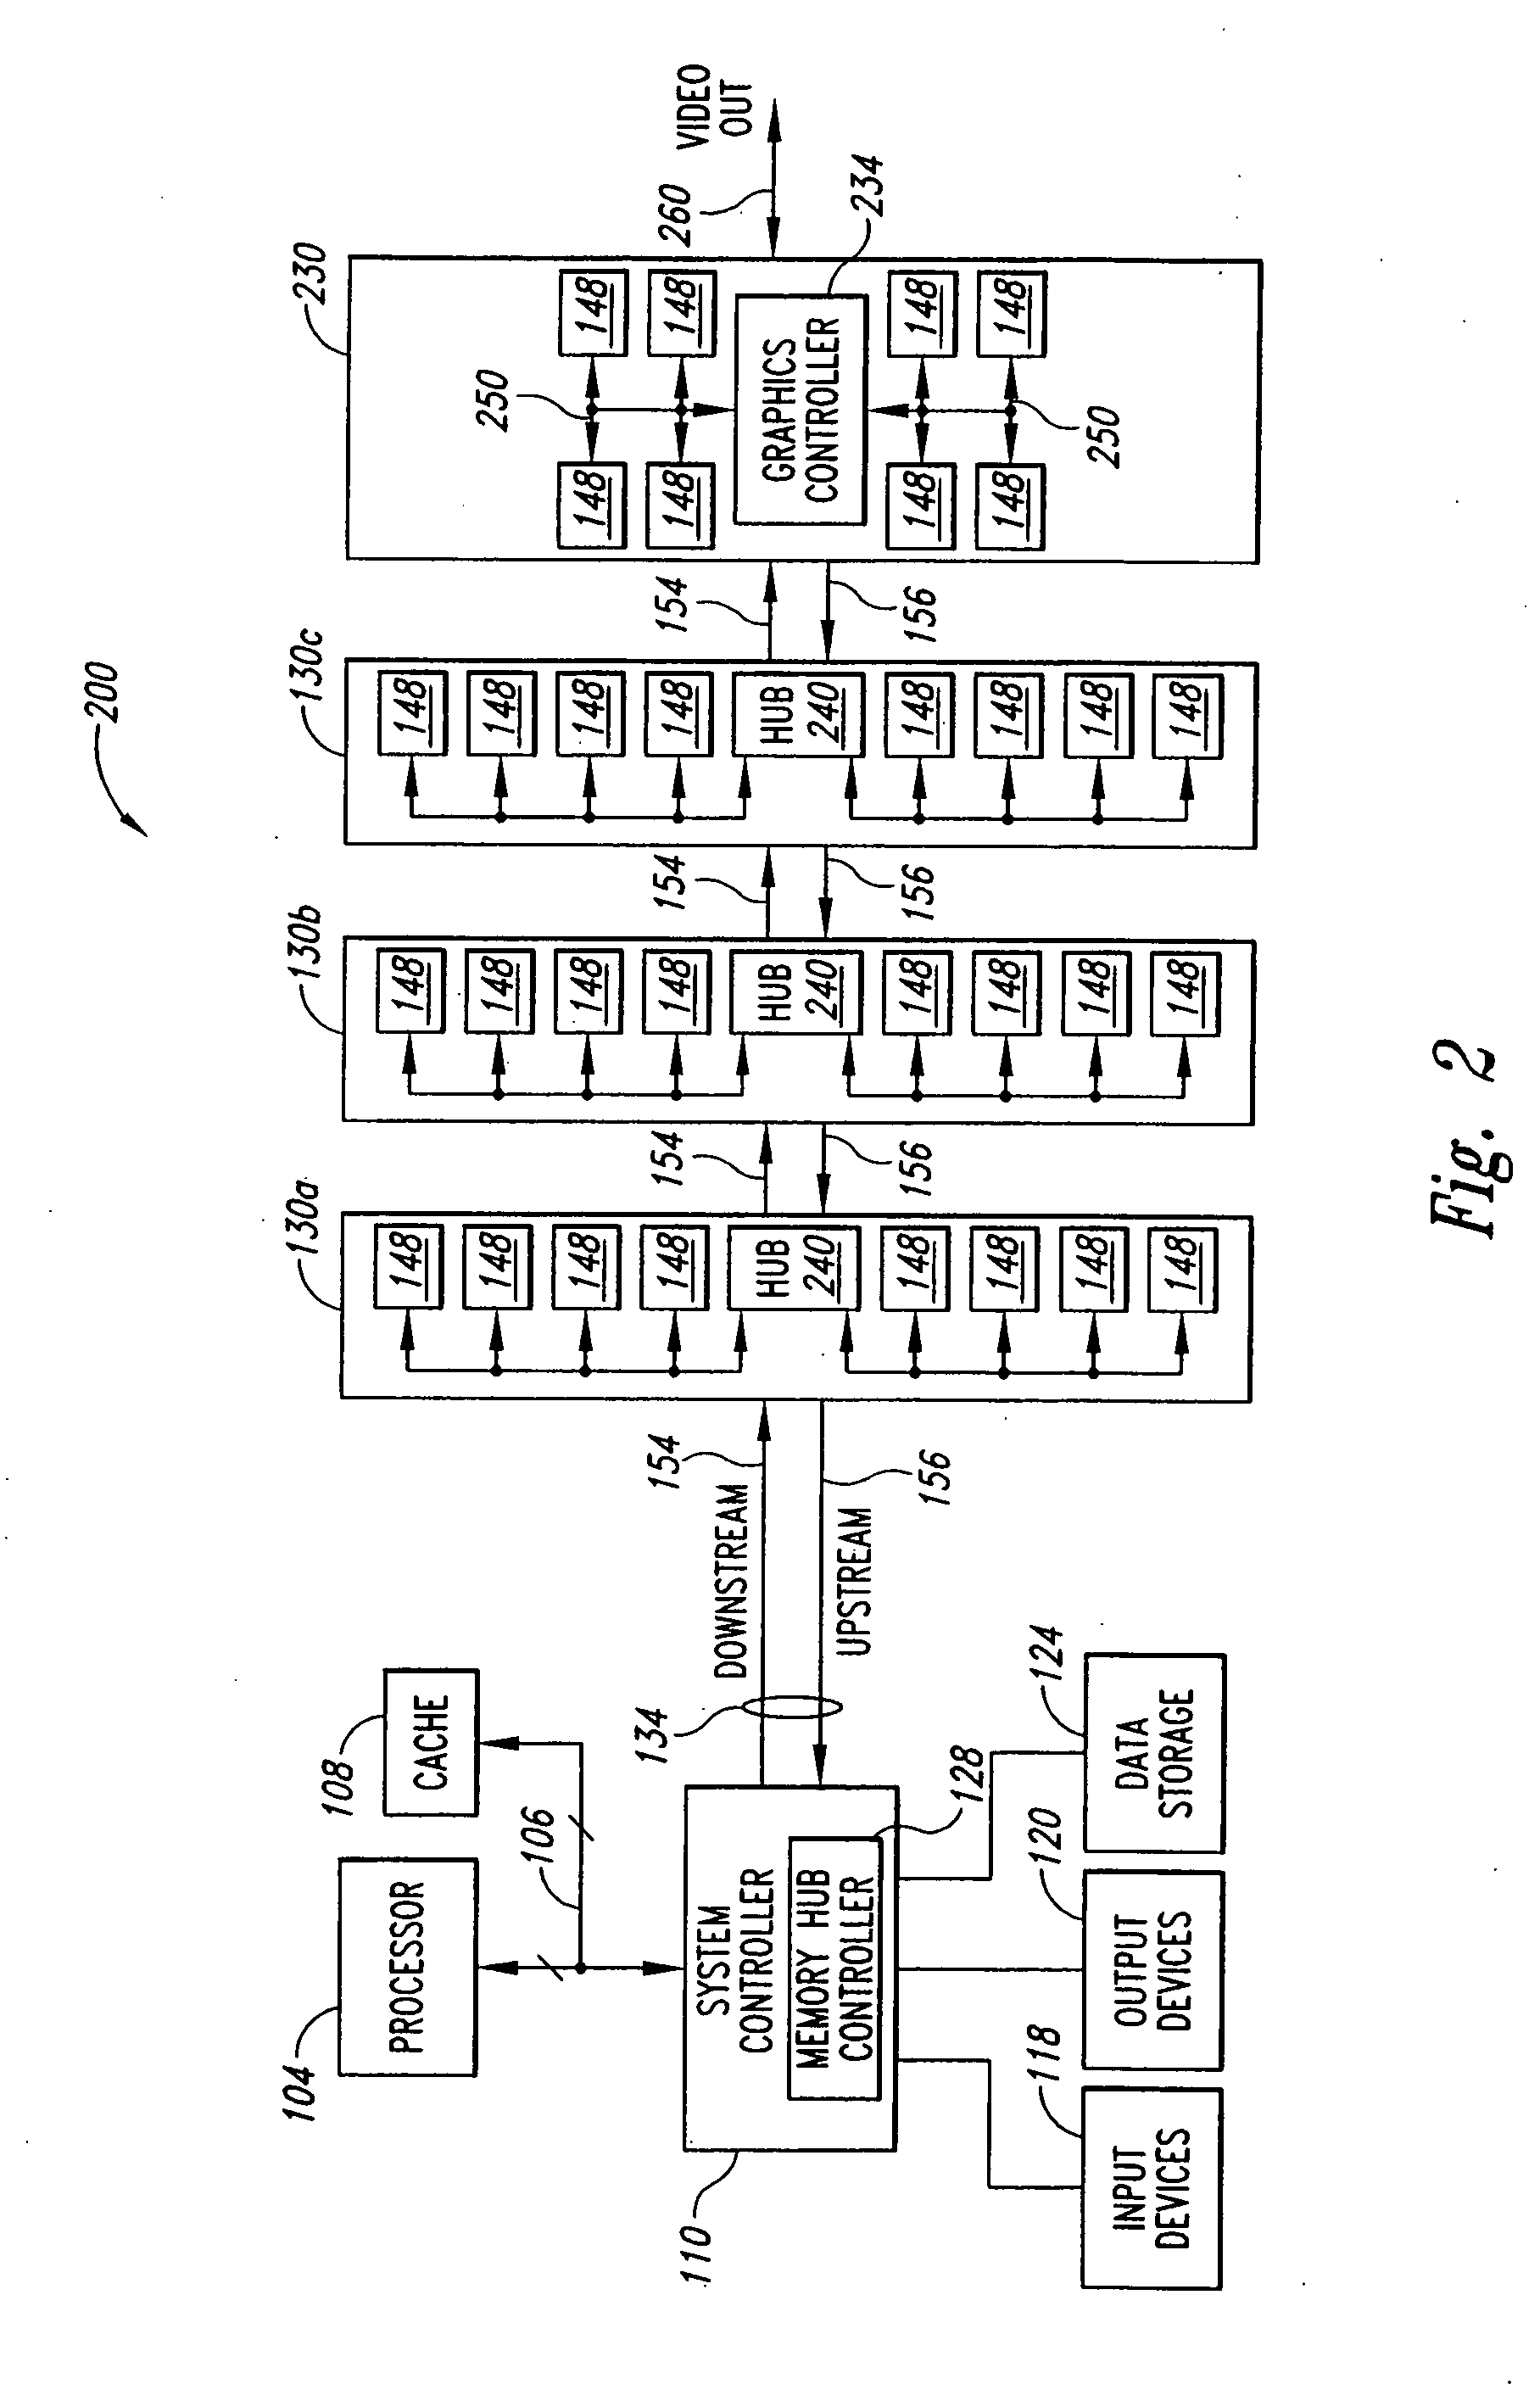 System and method for memory hub-based expansion bus